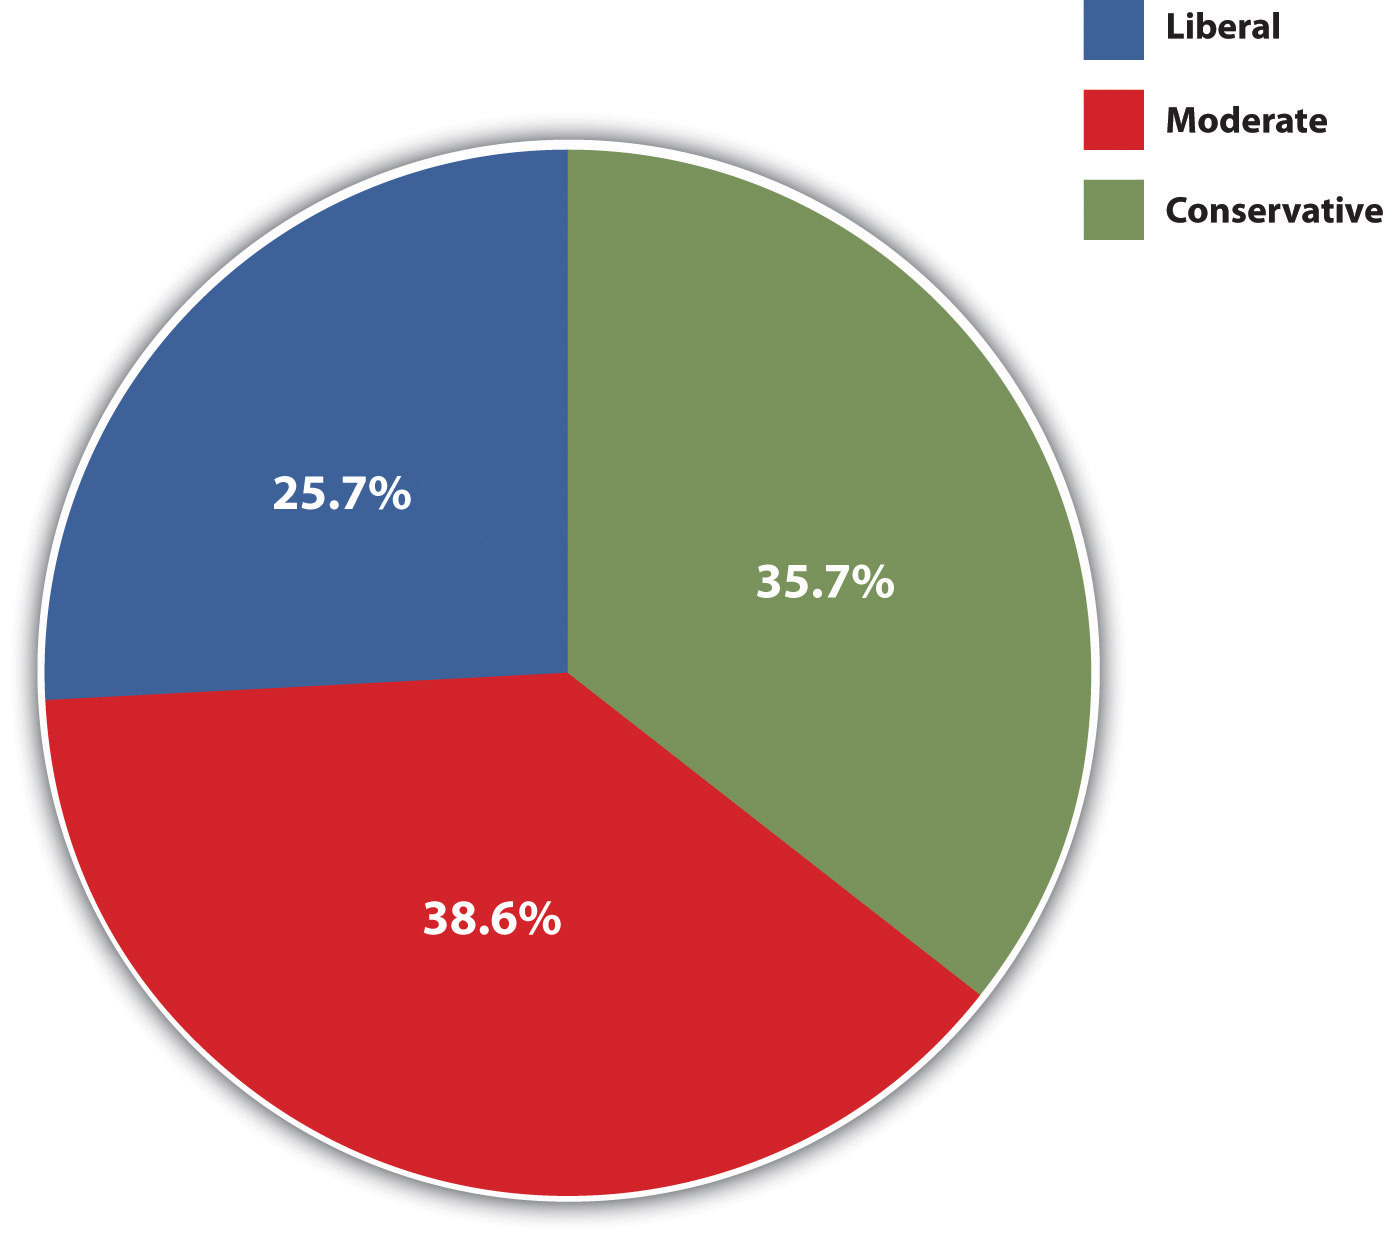 Political Ideology: 38.6% moderate, 35.7% conservative, and 25.7% liberal